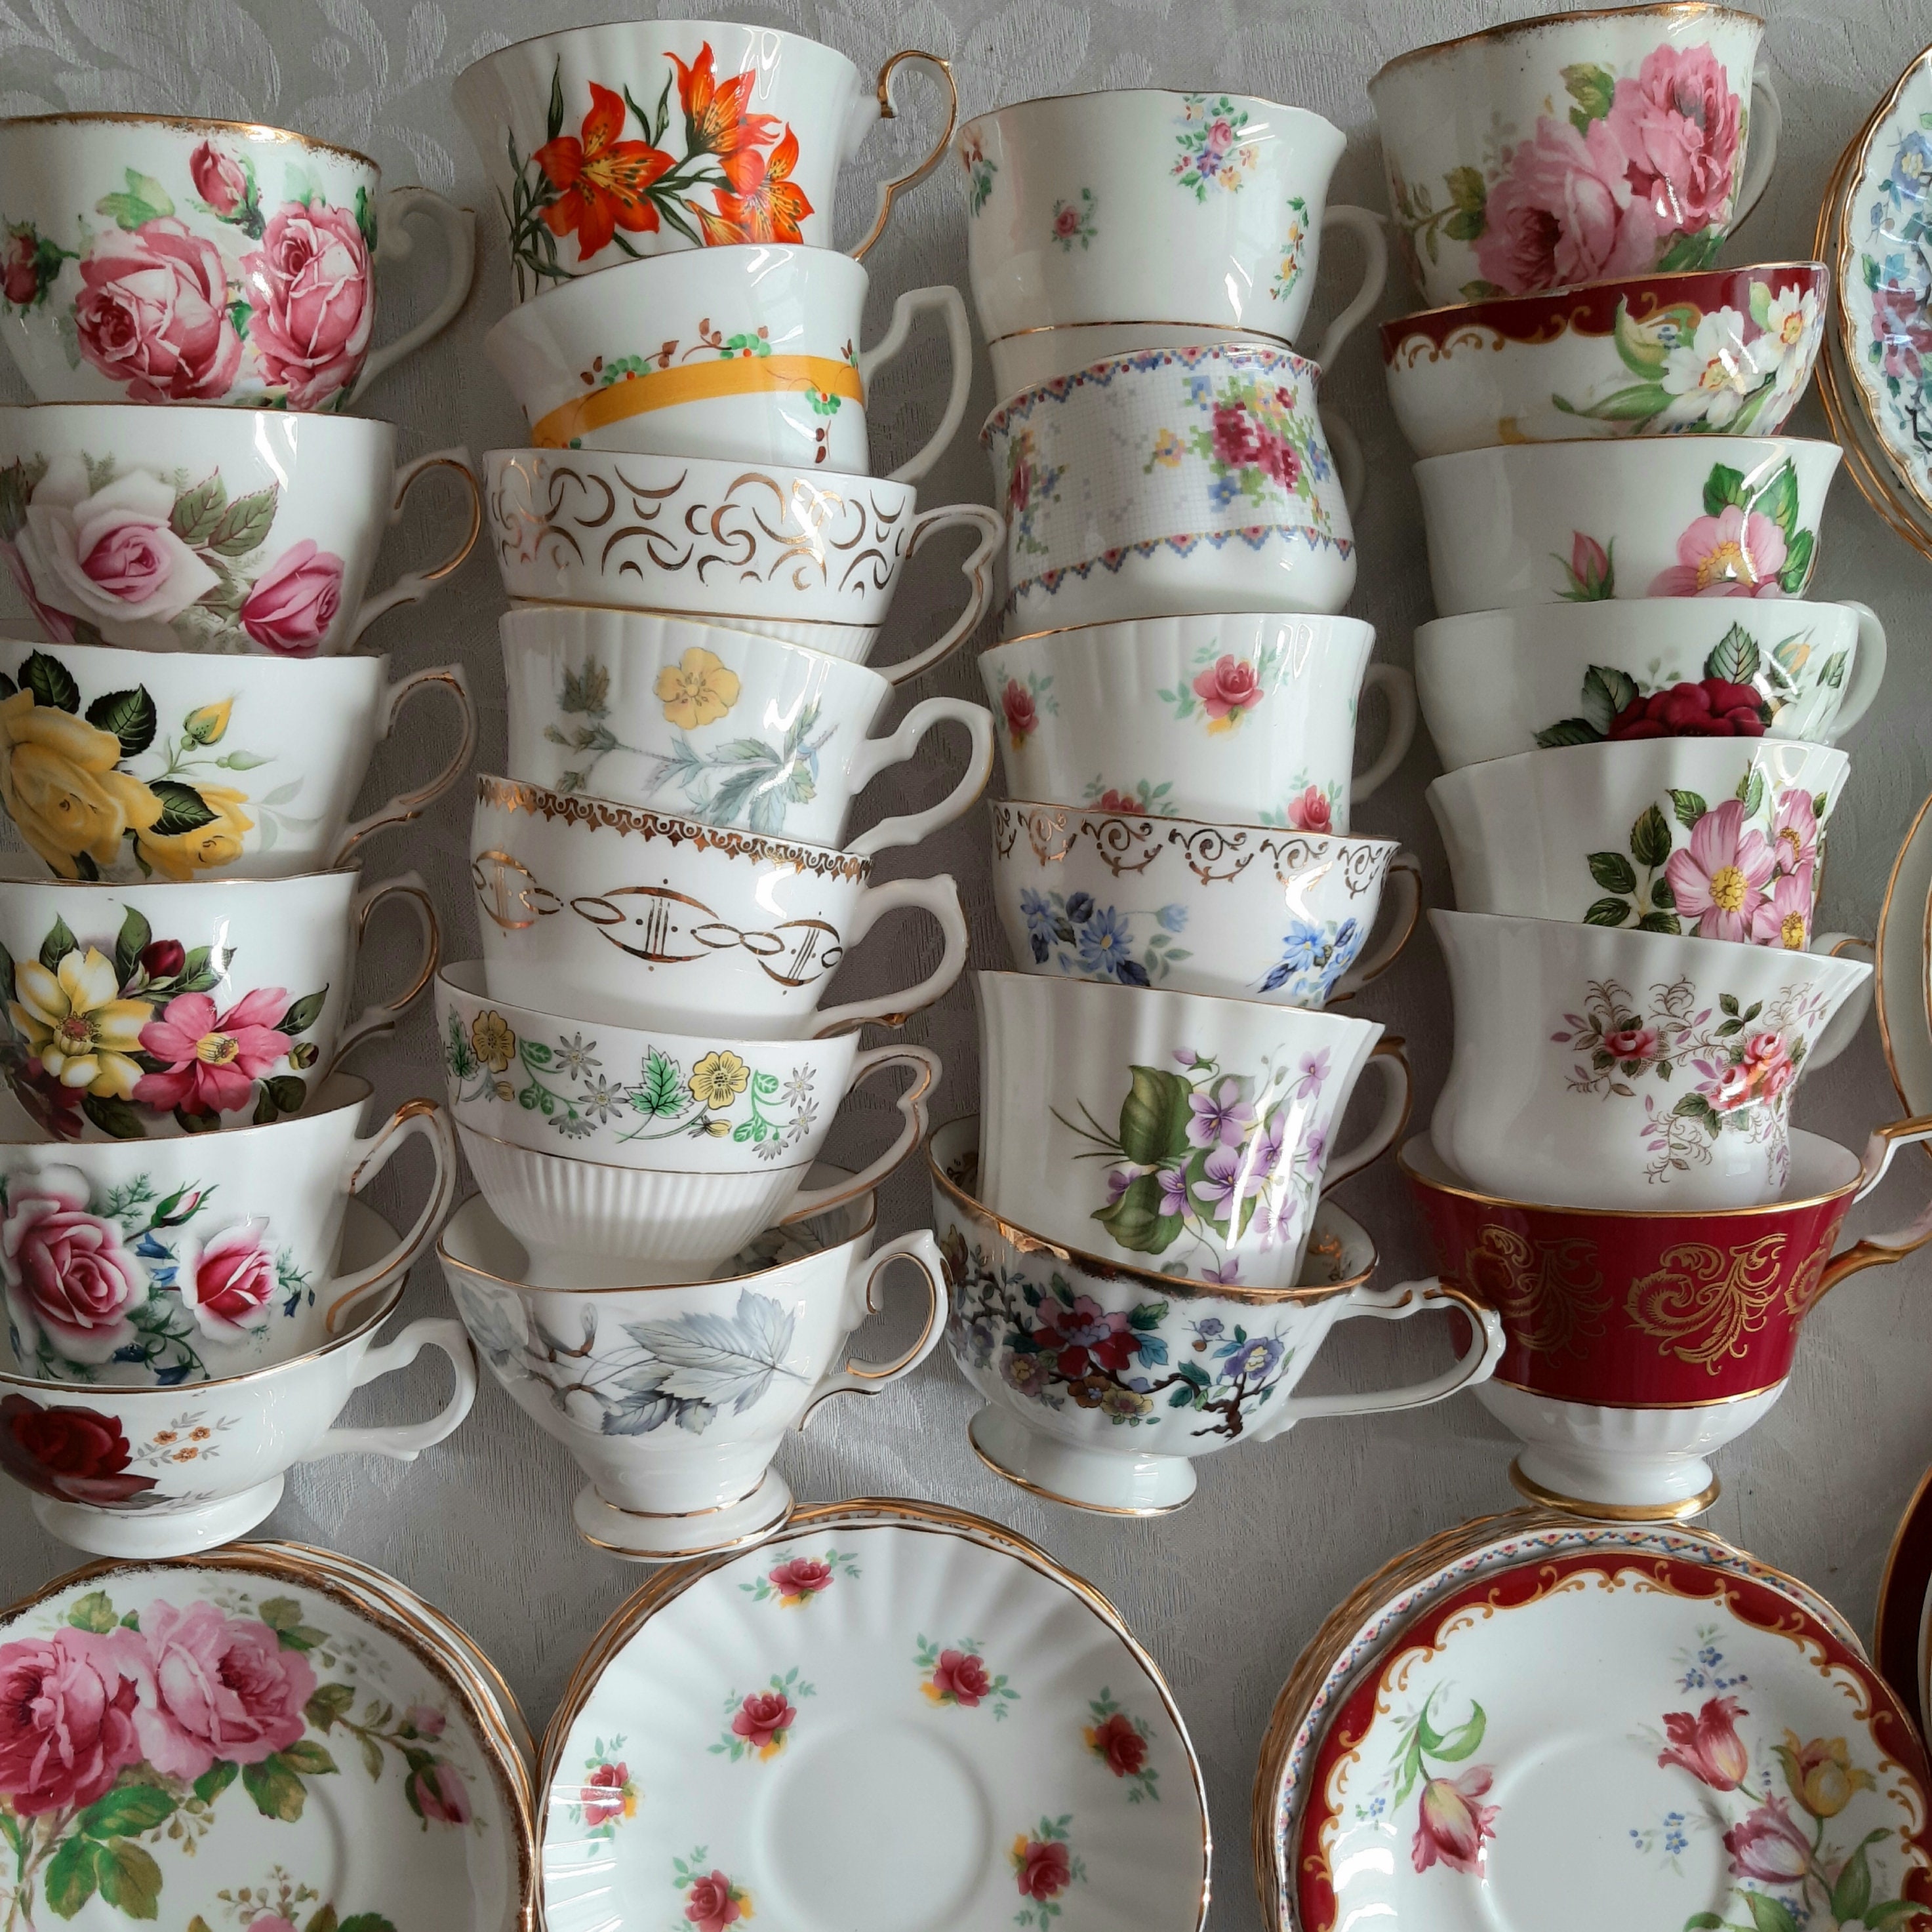 Mix and Match Vintage Tea Cup & Saucer — The Wedding Plate